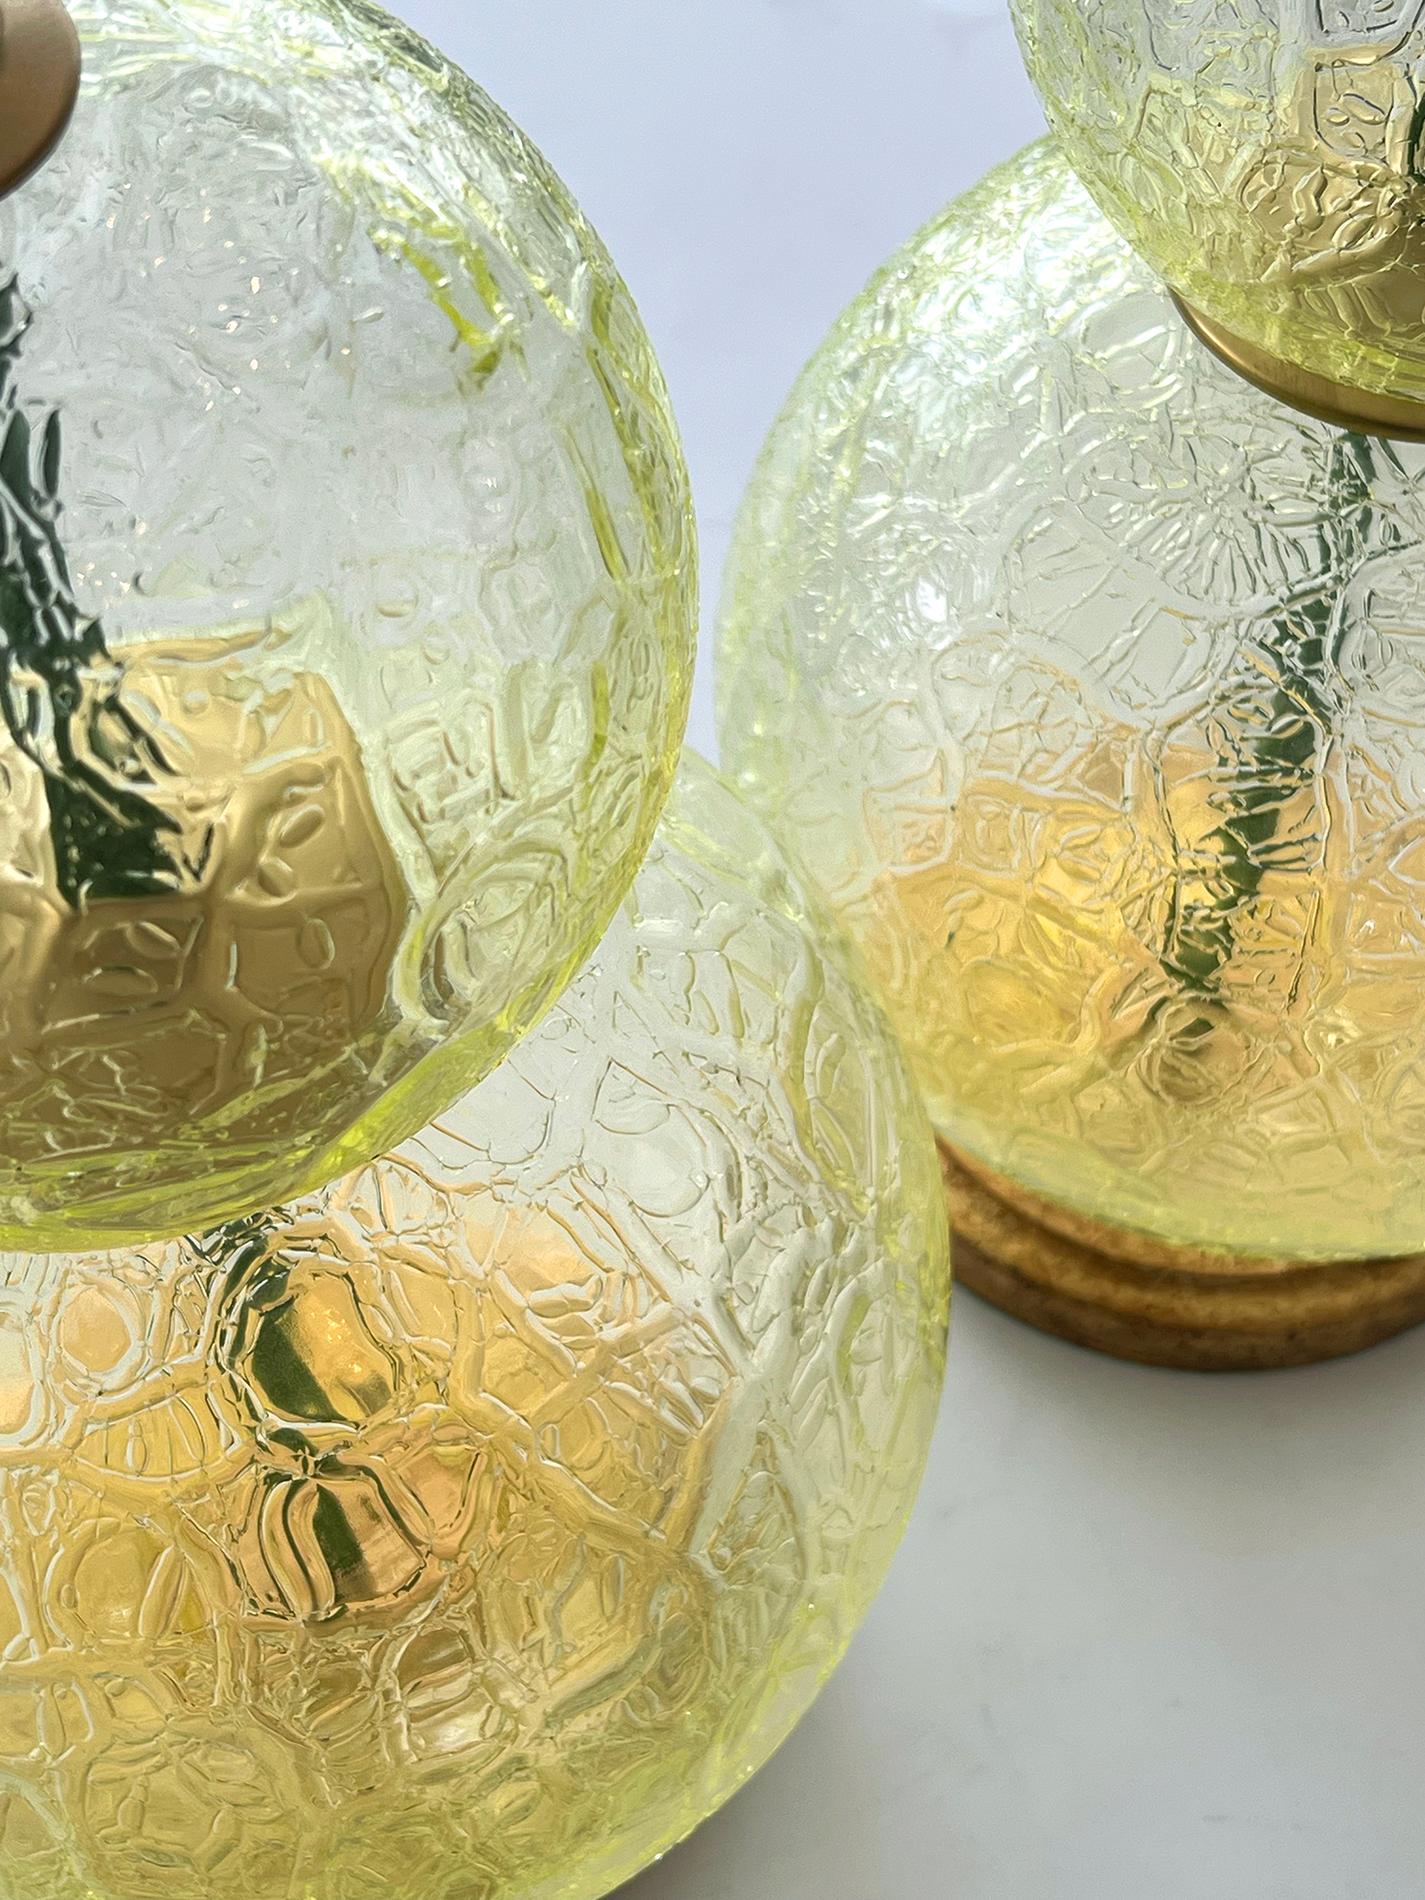 each lamp by Swank Lighting in a magical textured chartreuse-colored glass with a frost-like translucent finish creating a blurry surface allowing scattered light to pass through; each with foil 'Swank Lighting' label; raised on giltwood bases